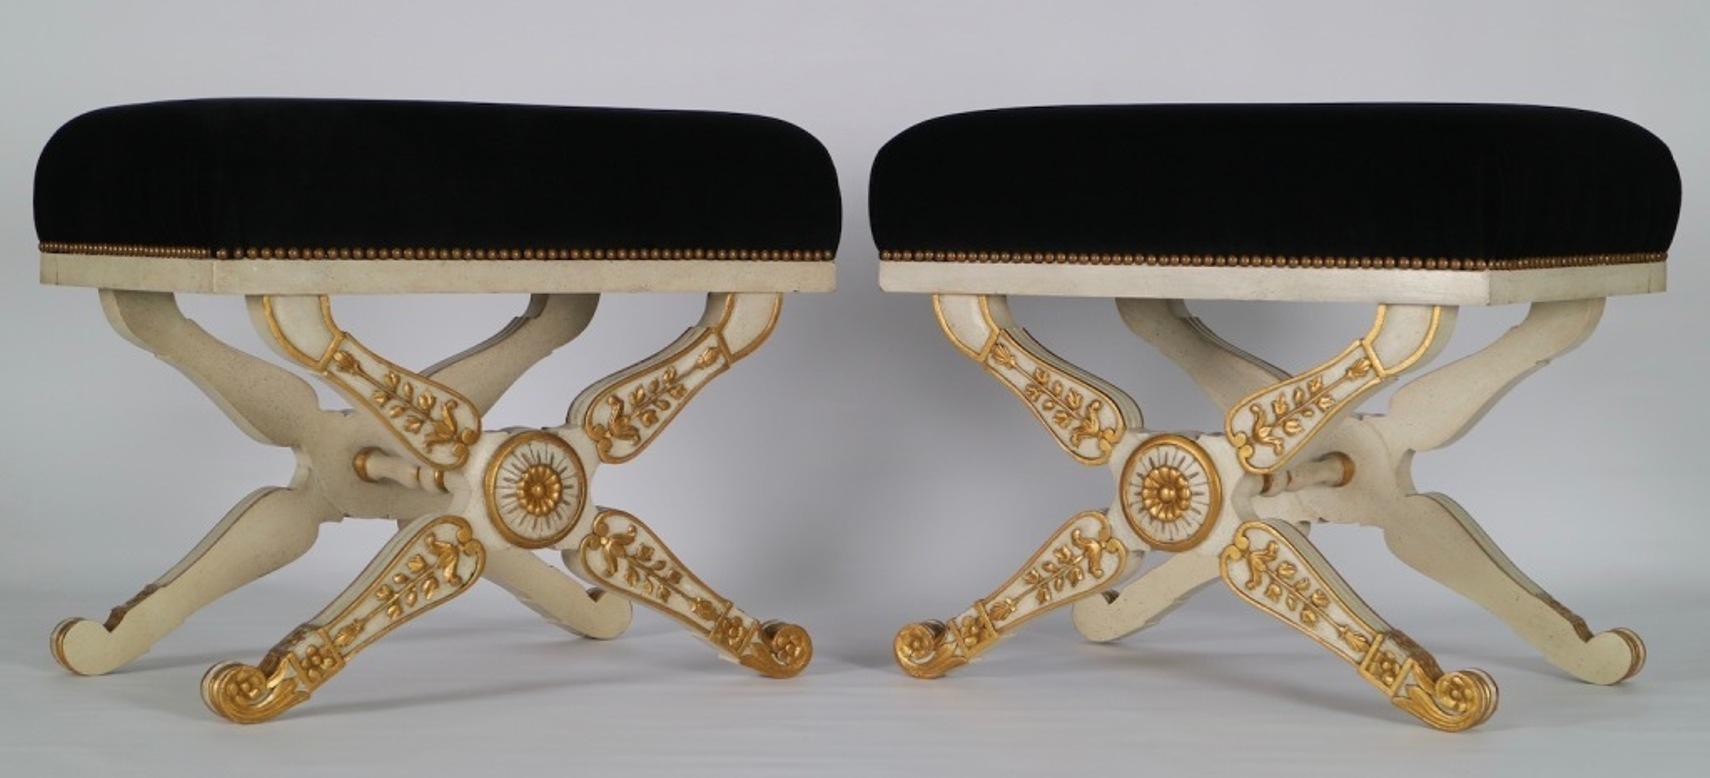 Painted Italian Hollywood Regency Benches in Carved Wood and Black Velvet